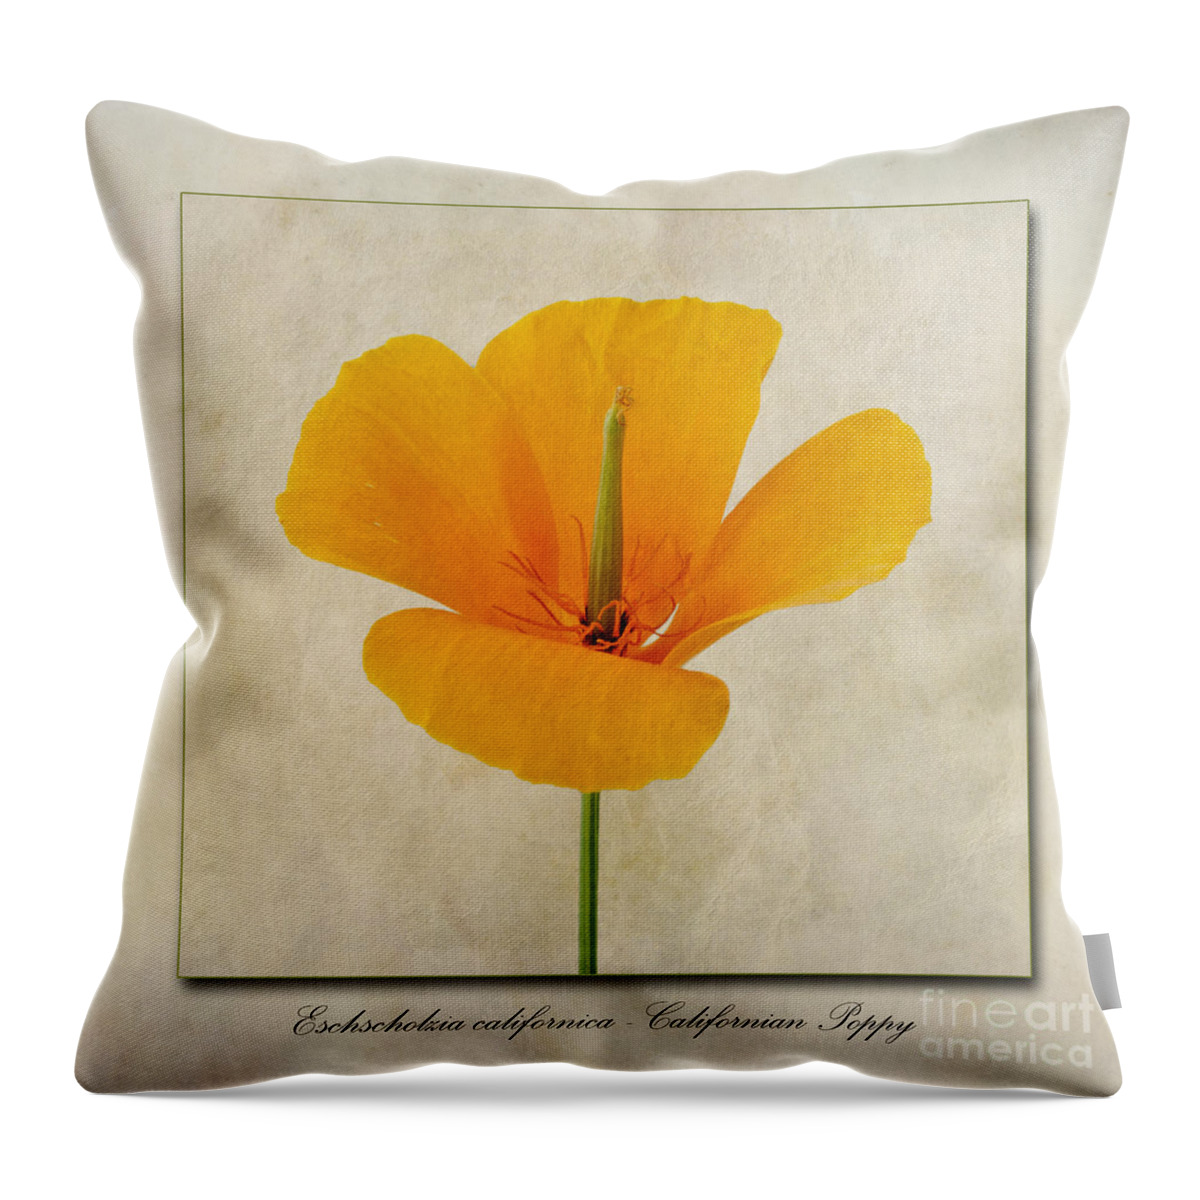 Californian Poppy Throw Pillow featuring the photograph Eschscholzia californica Californian Poppy by John Edwards